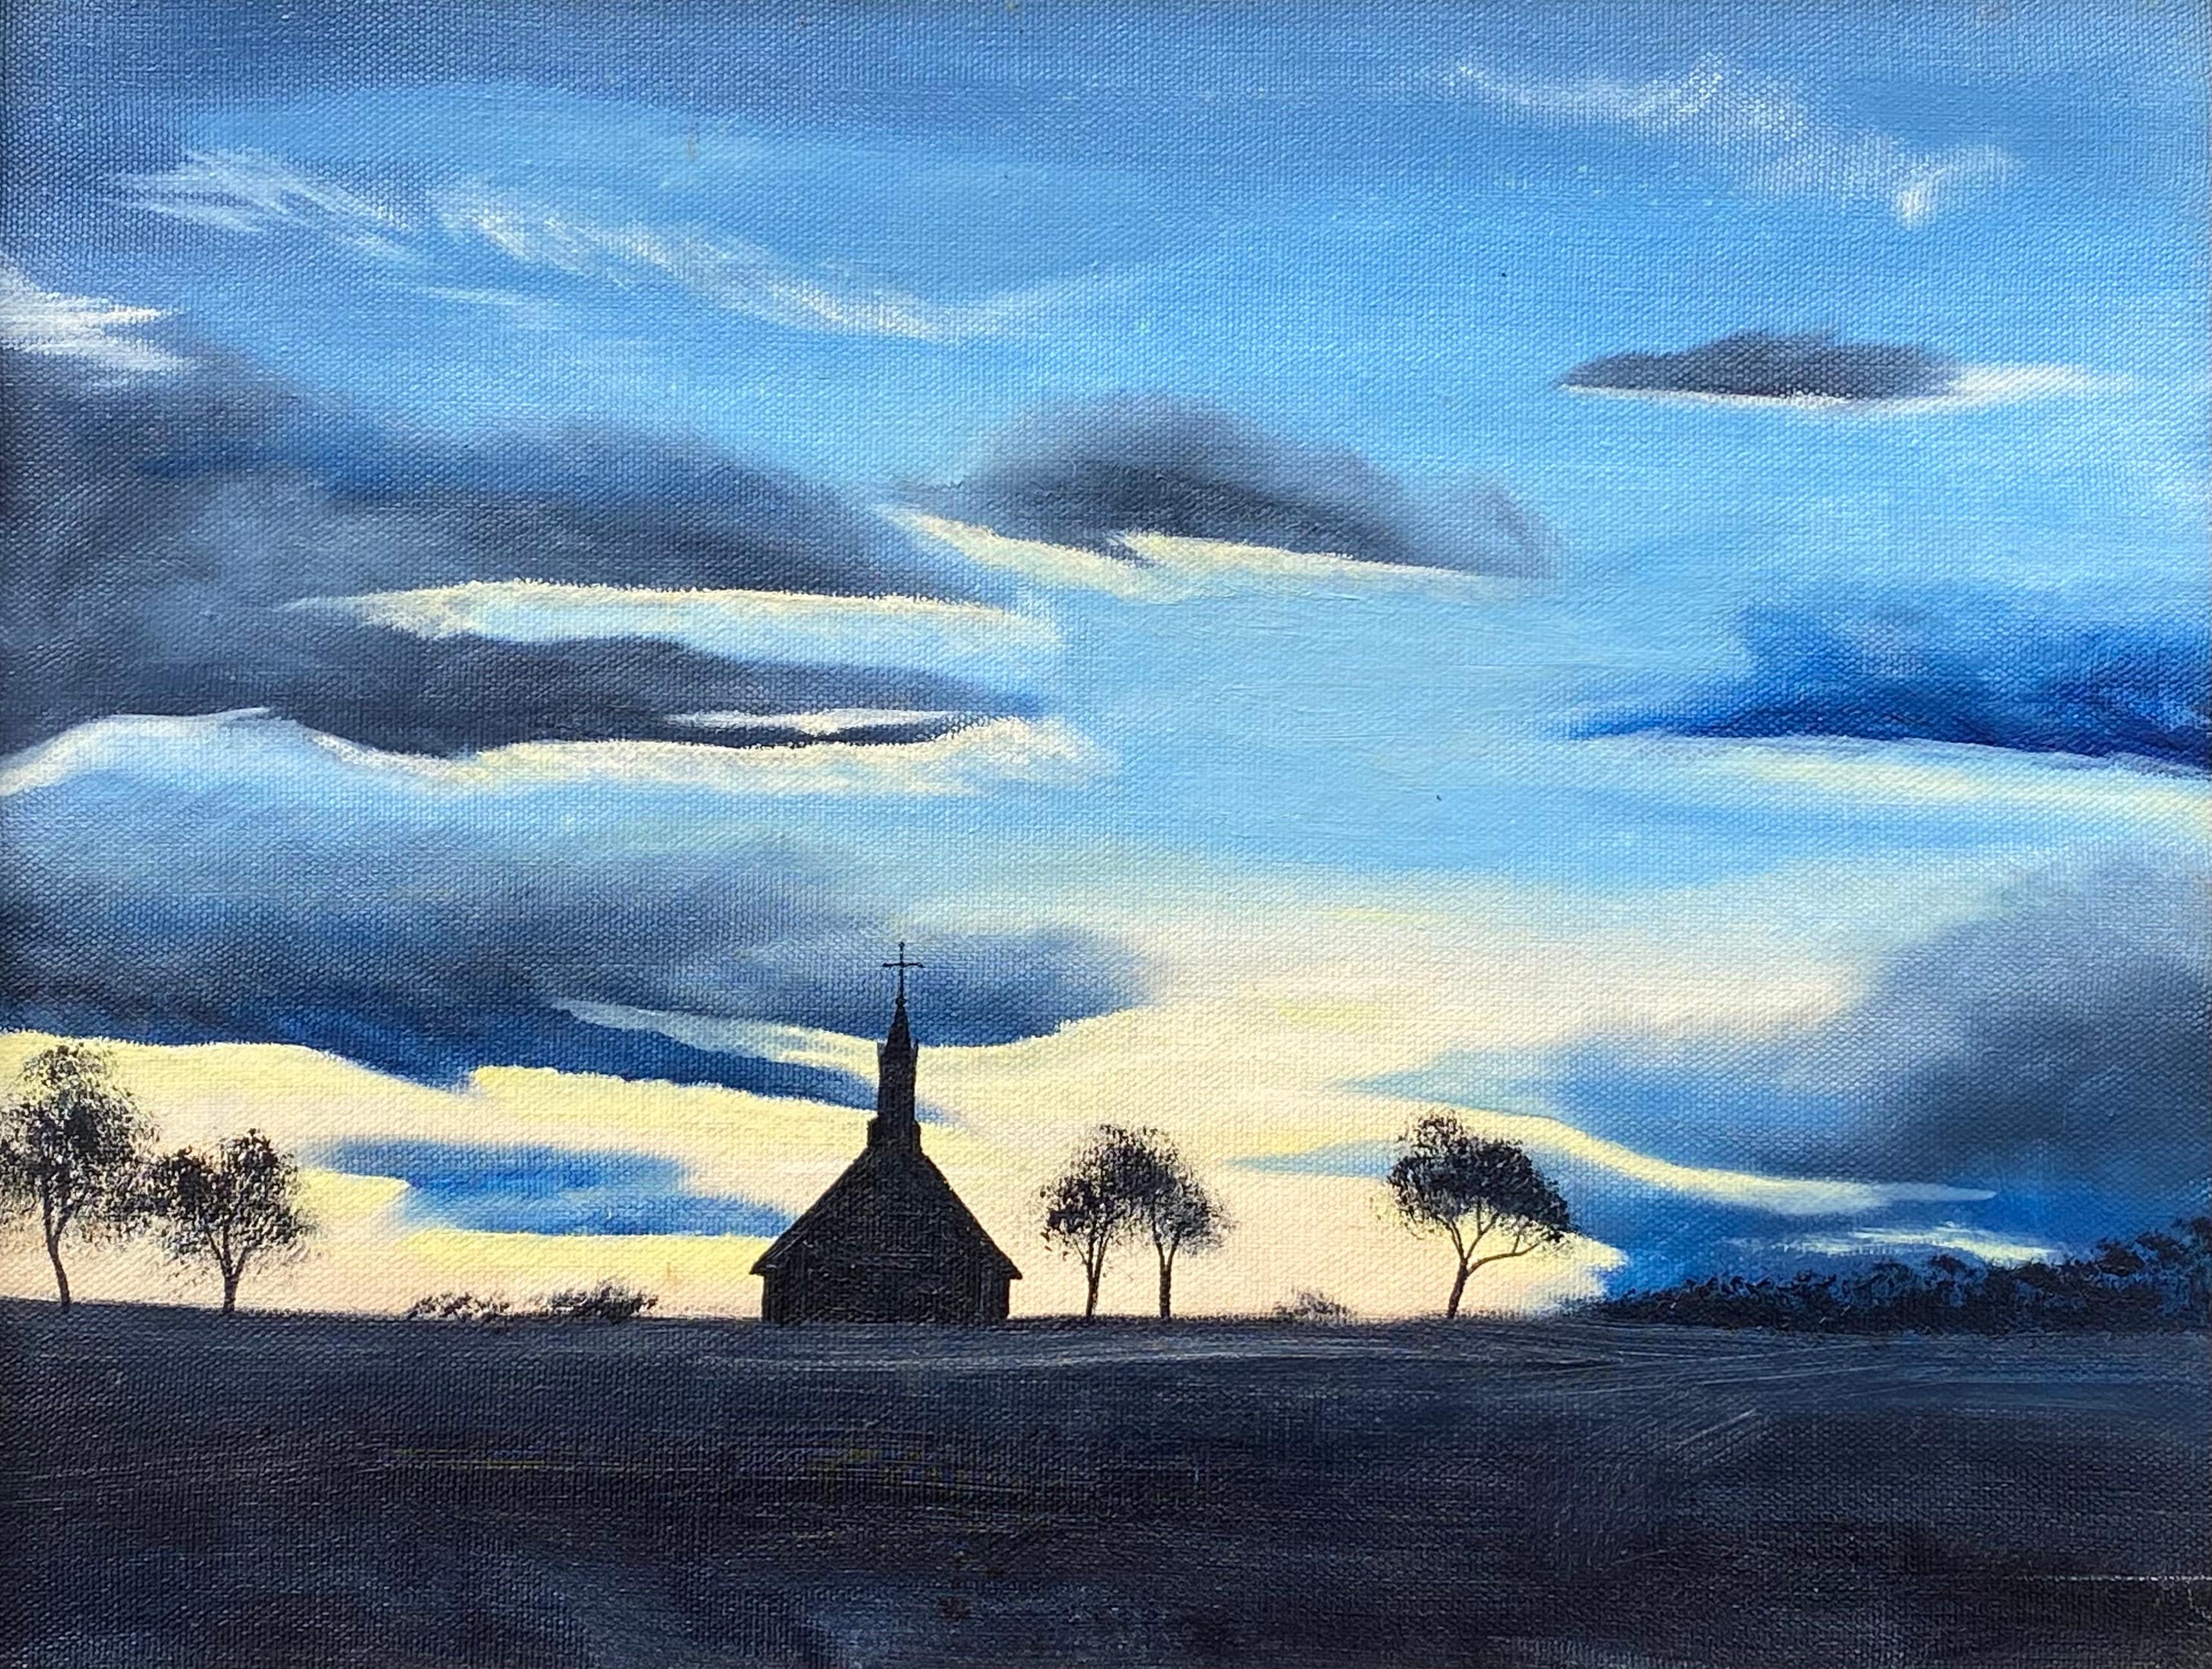 Original, dramatic oil on canvas painting of a chapel in sunrise. Unsigned. Circa 2010.  Condition is excellent. The painting is housed in a dark stained pine frame with gold leaf inner liner.  Overall framed measurements are 15.5 by 18.5 inches.